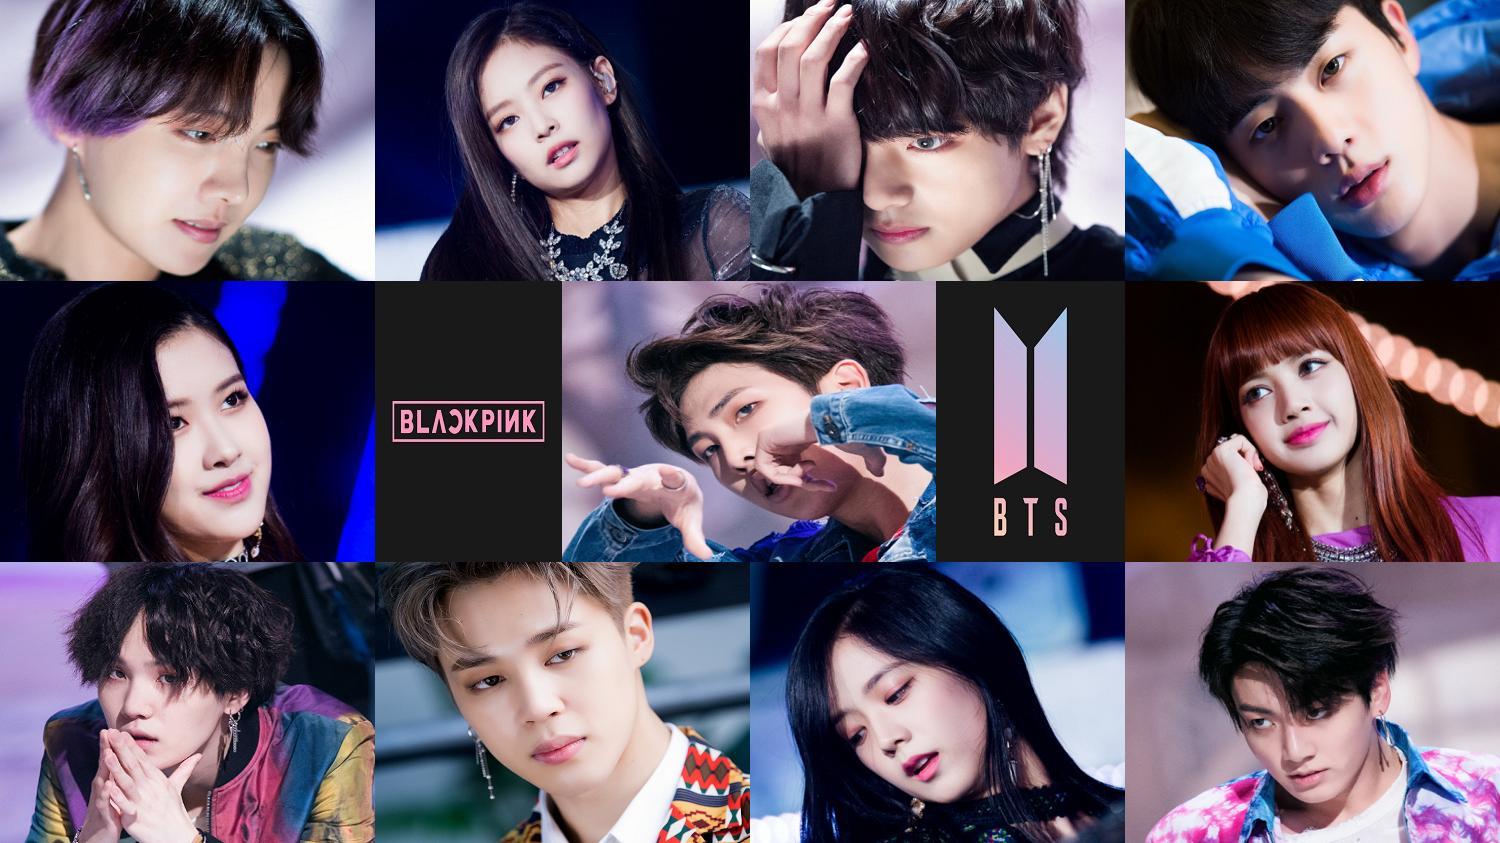 BTS beats Drake Justin Bieber on list of moststreamed artists globally  reigns on list of top KPop stars with BLACKPINK and TWICE  Kpop Movie  News  Times of India